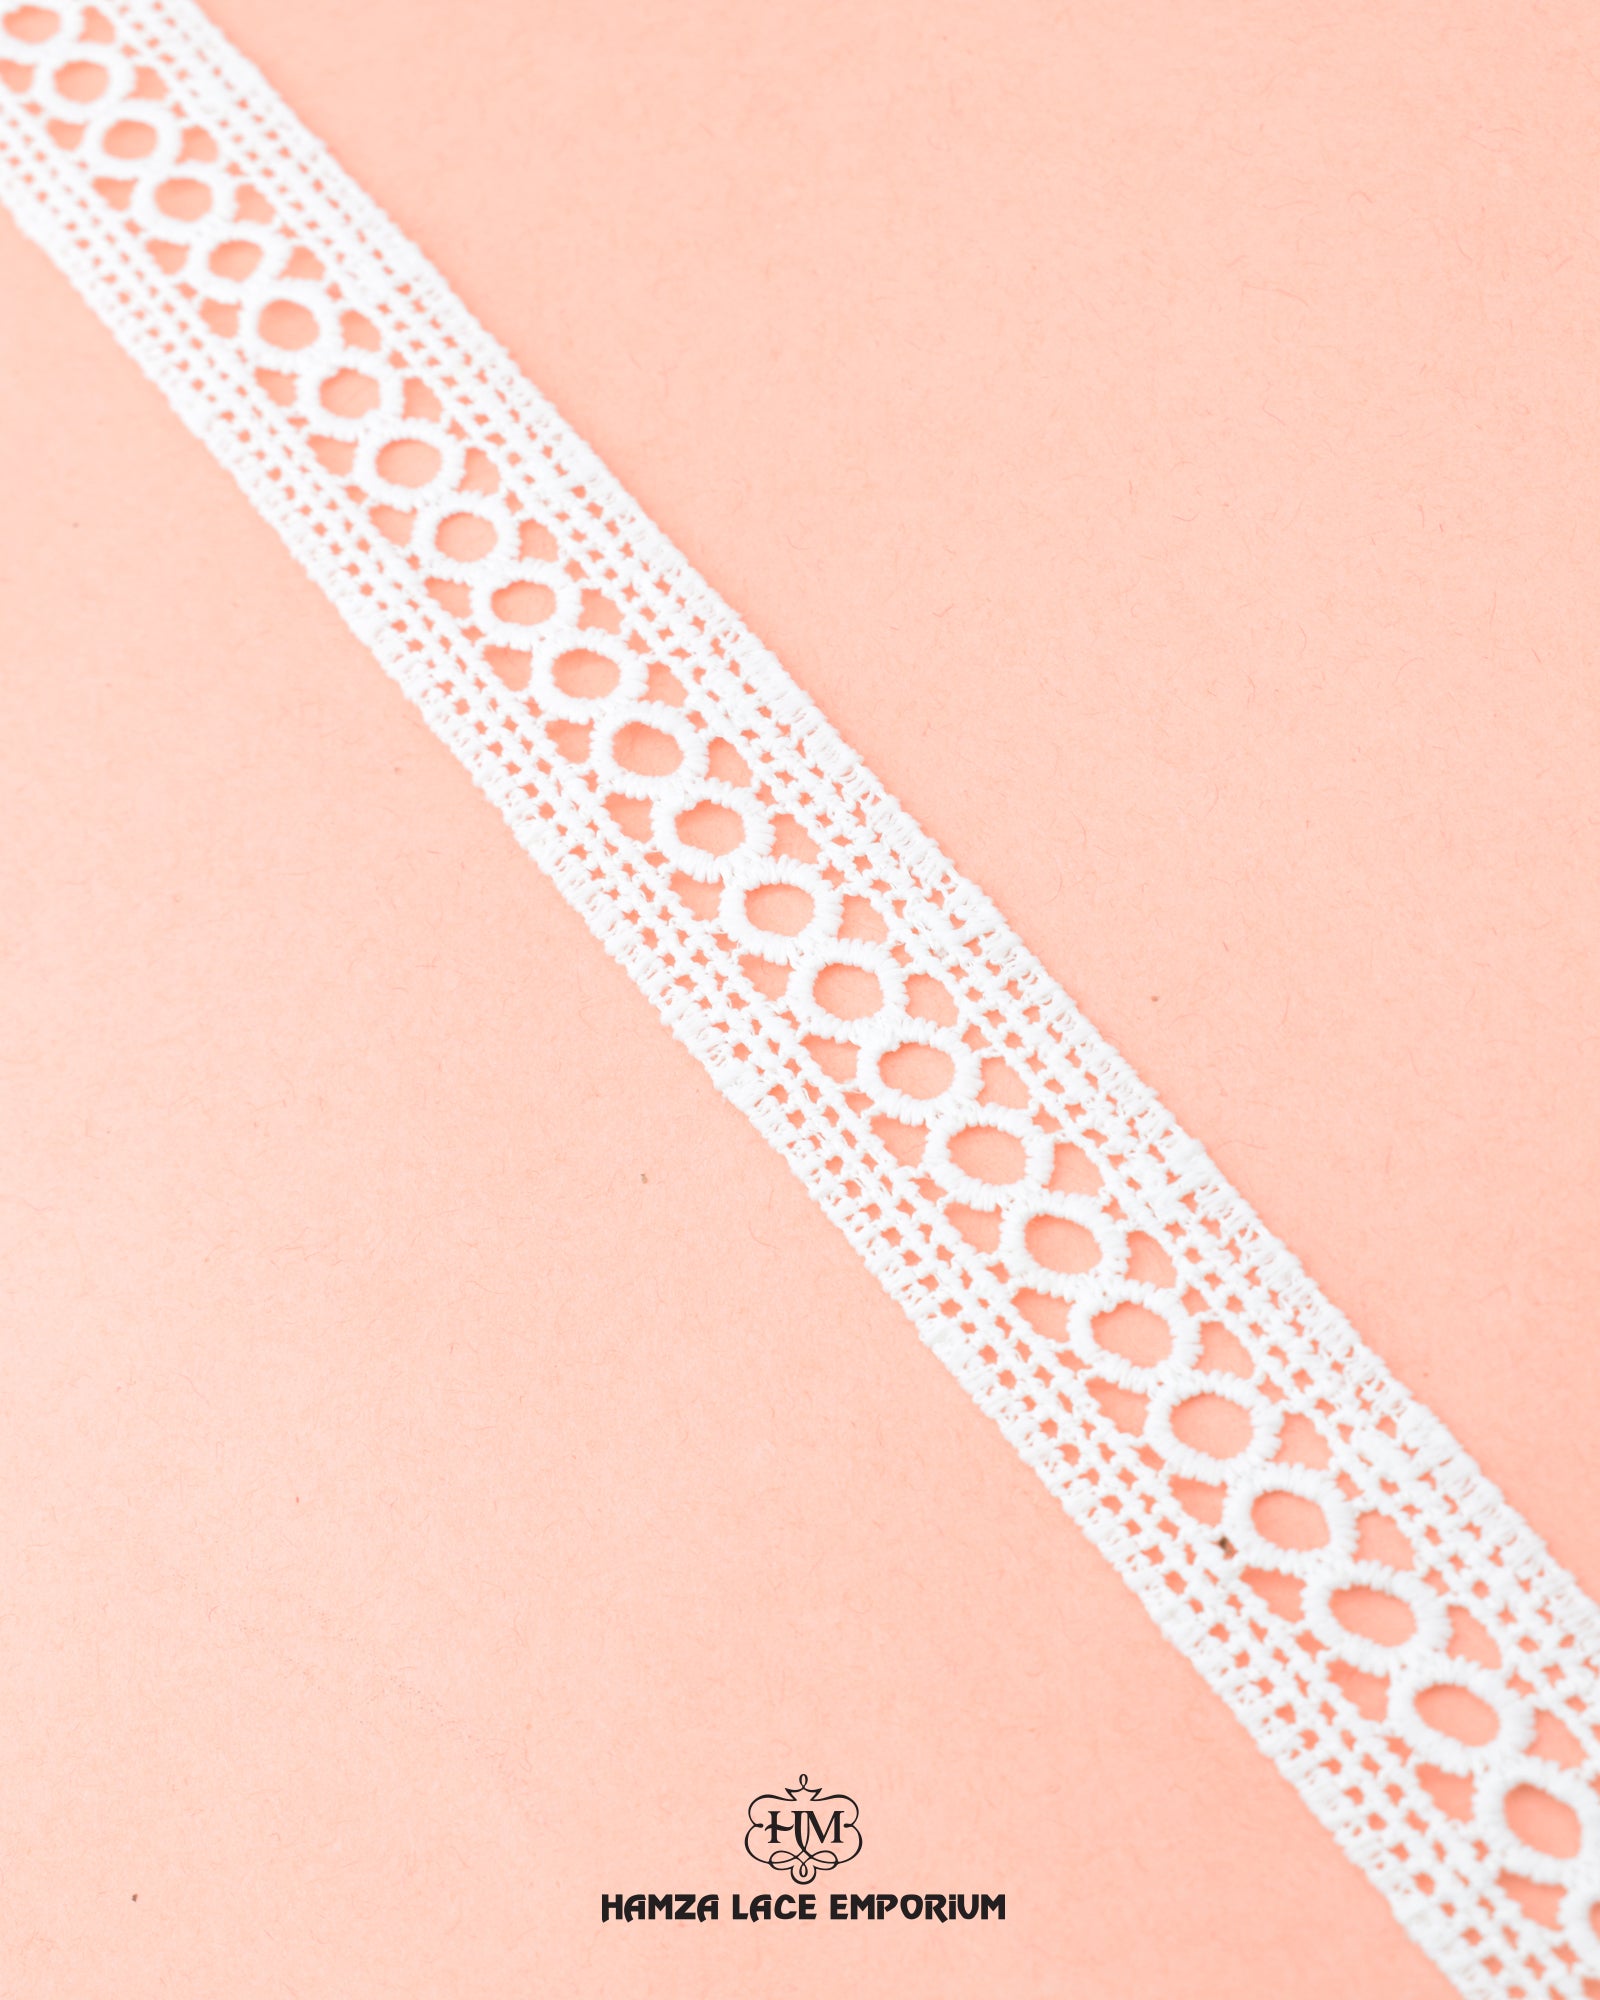 'Center Ring Lace 23009' with the sign 'Hamza Lace'